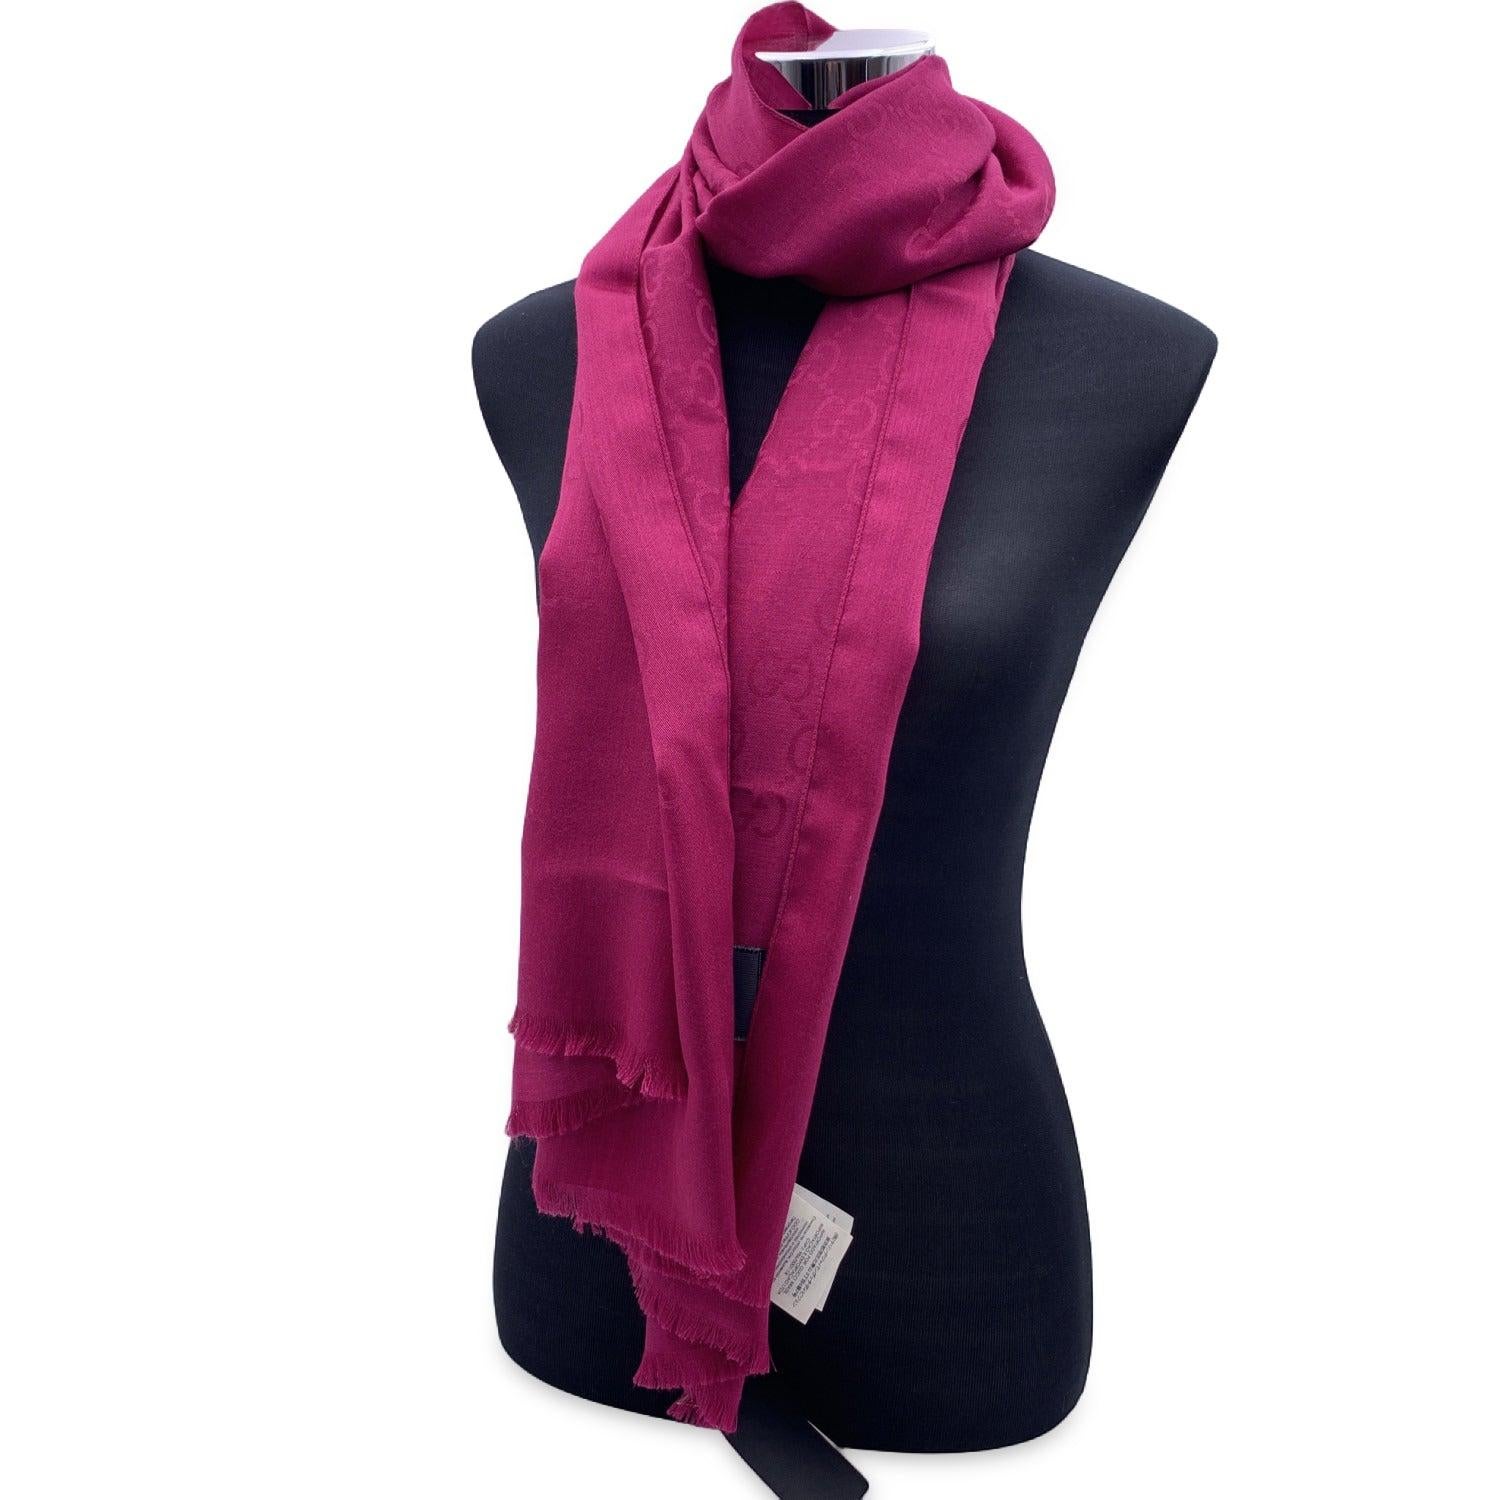 Red Magenta GG jacquard wool and silk scarf by Gucci. Width: 45 cm. Lenght: 180 cm. Frayed edges. Made in Italy. Composition: 70% wool 30% silk. Details MATERIAL: Wool COLOR: Red MODEL: n.a. GENDER: Unisex Adults COUNTRY OF MANUFACTURE: Italy